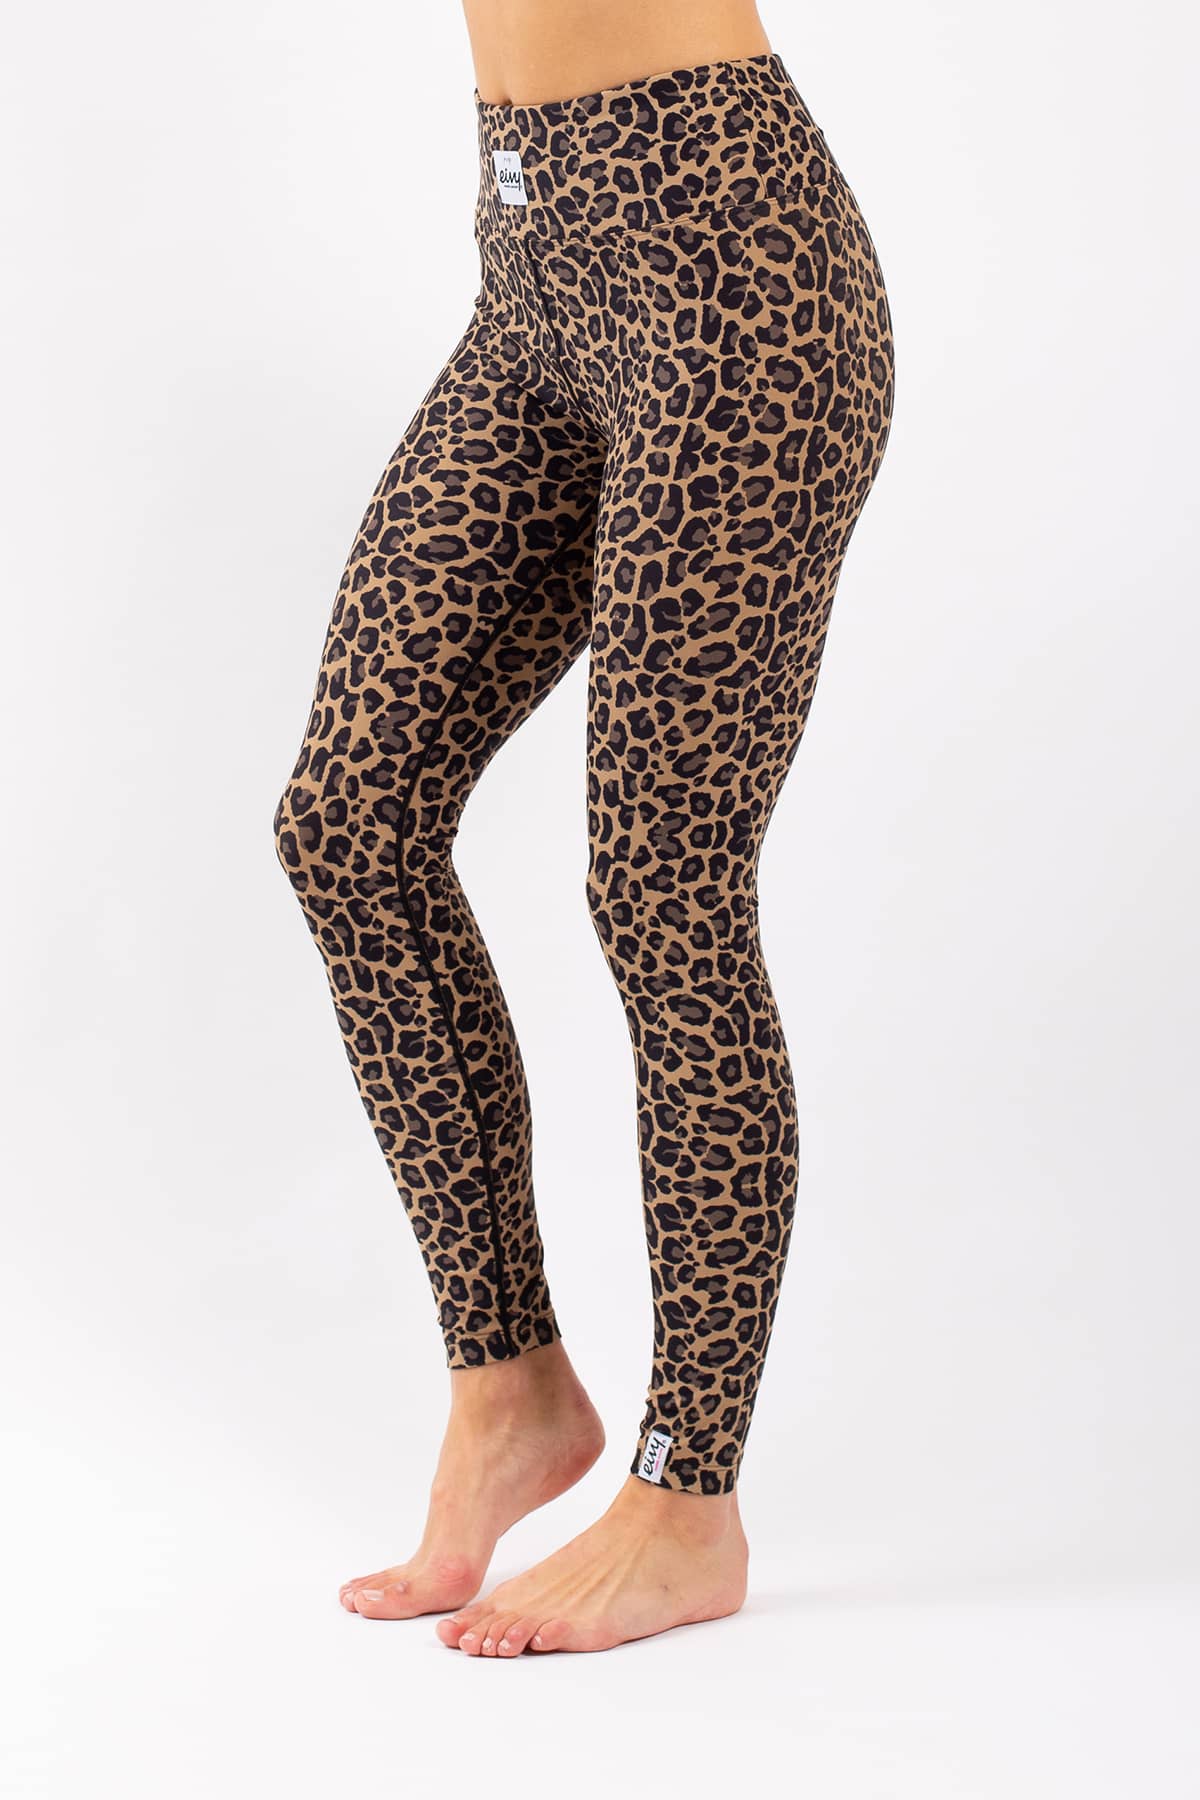 Eivy Icecold Tights Leggings leopard XS